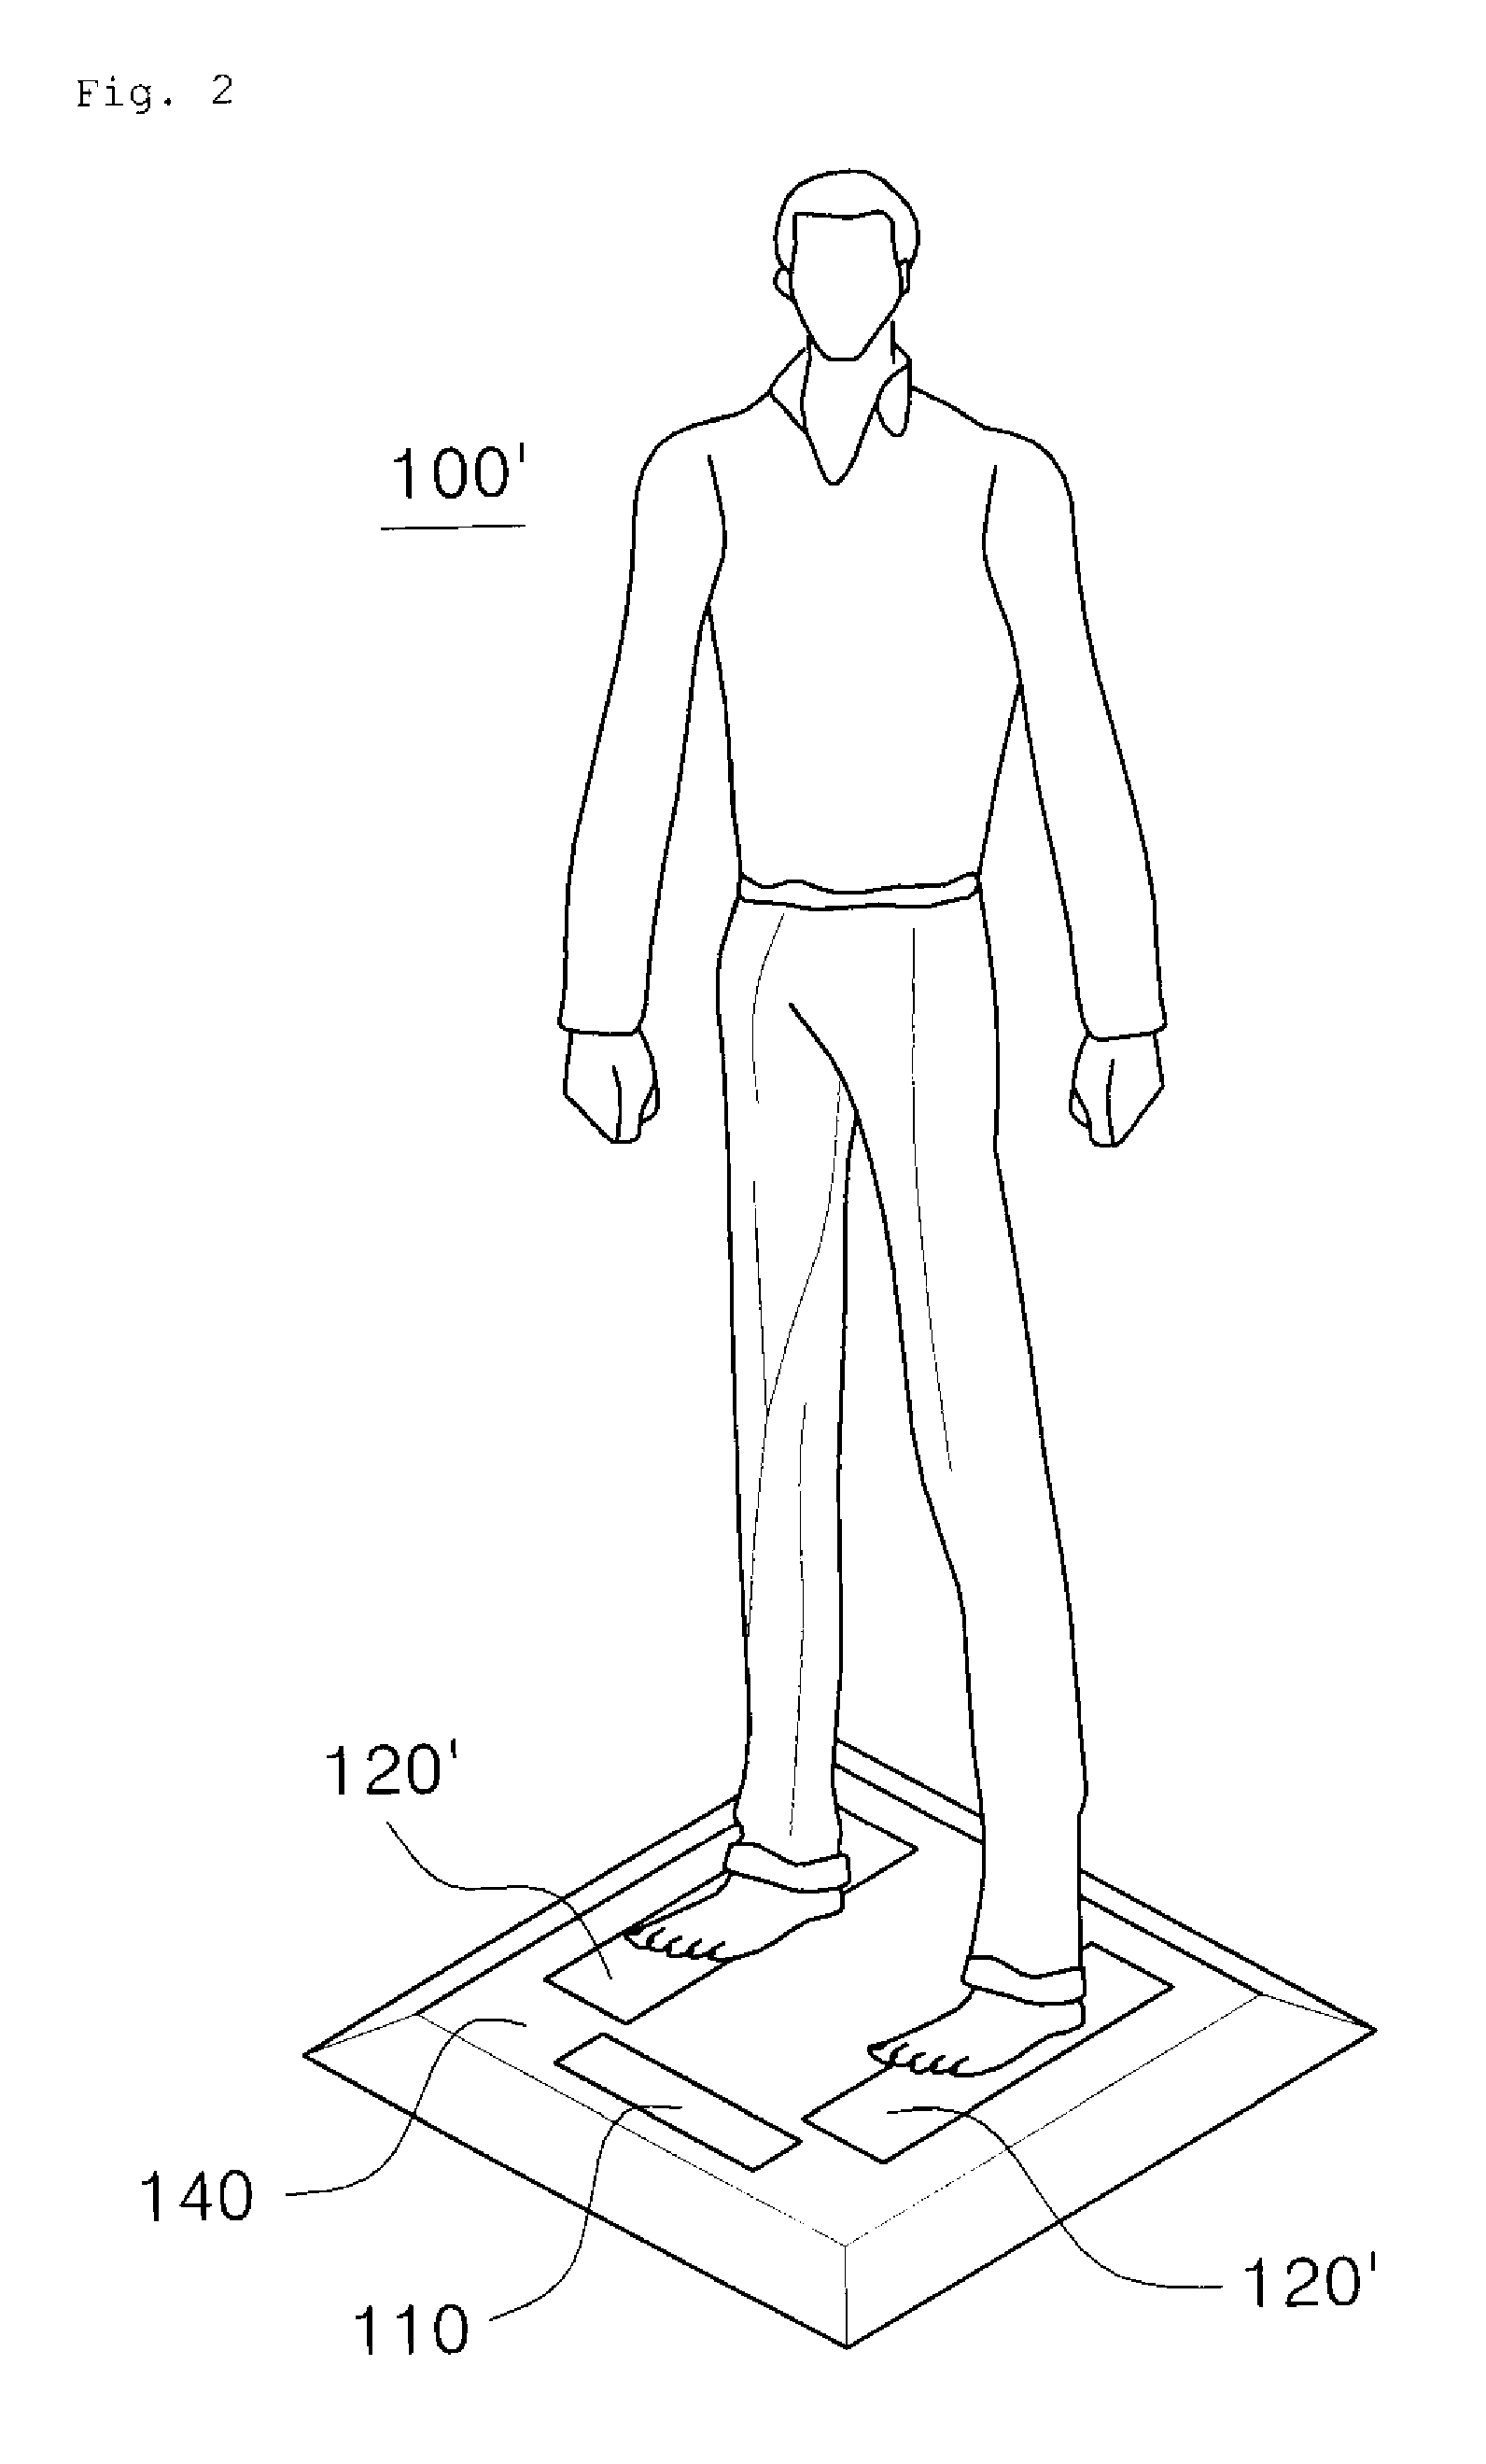 Scale-type nonconstrained health condition evaluating apparatus and method